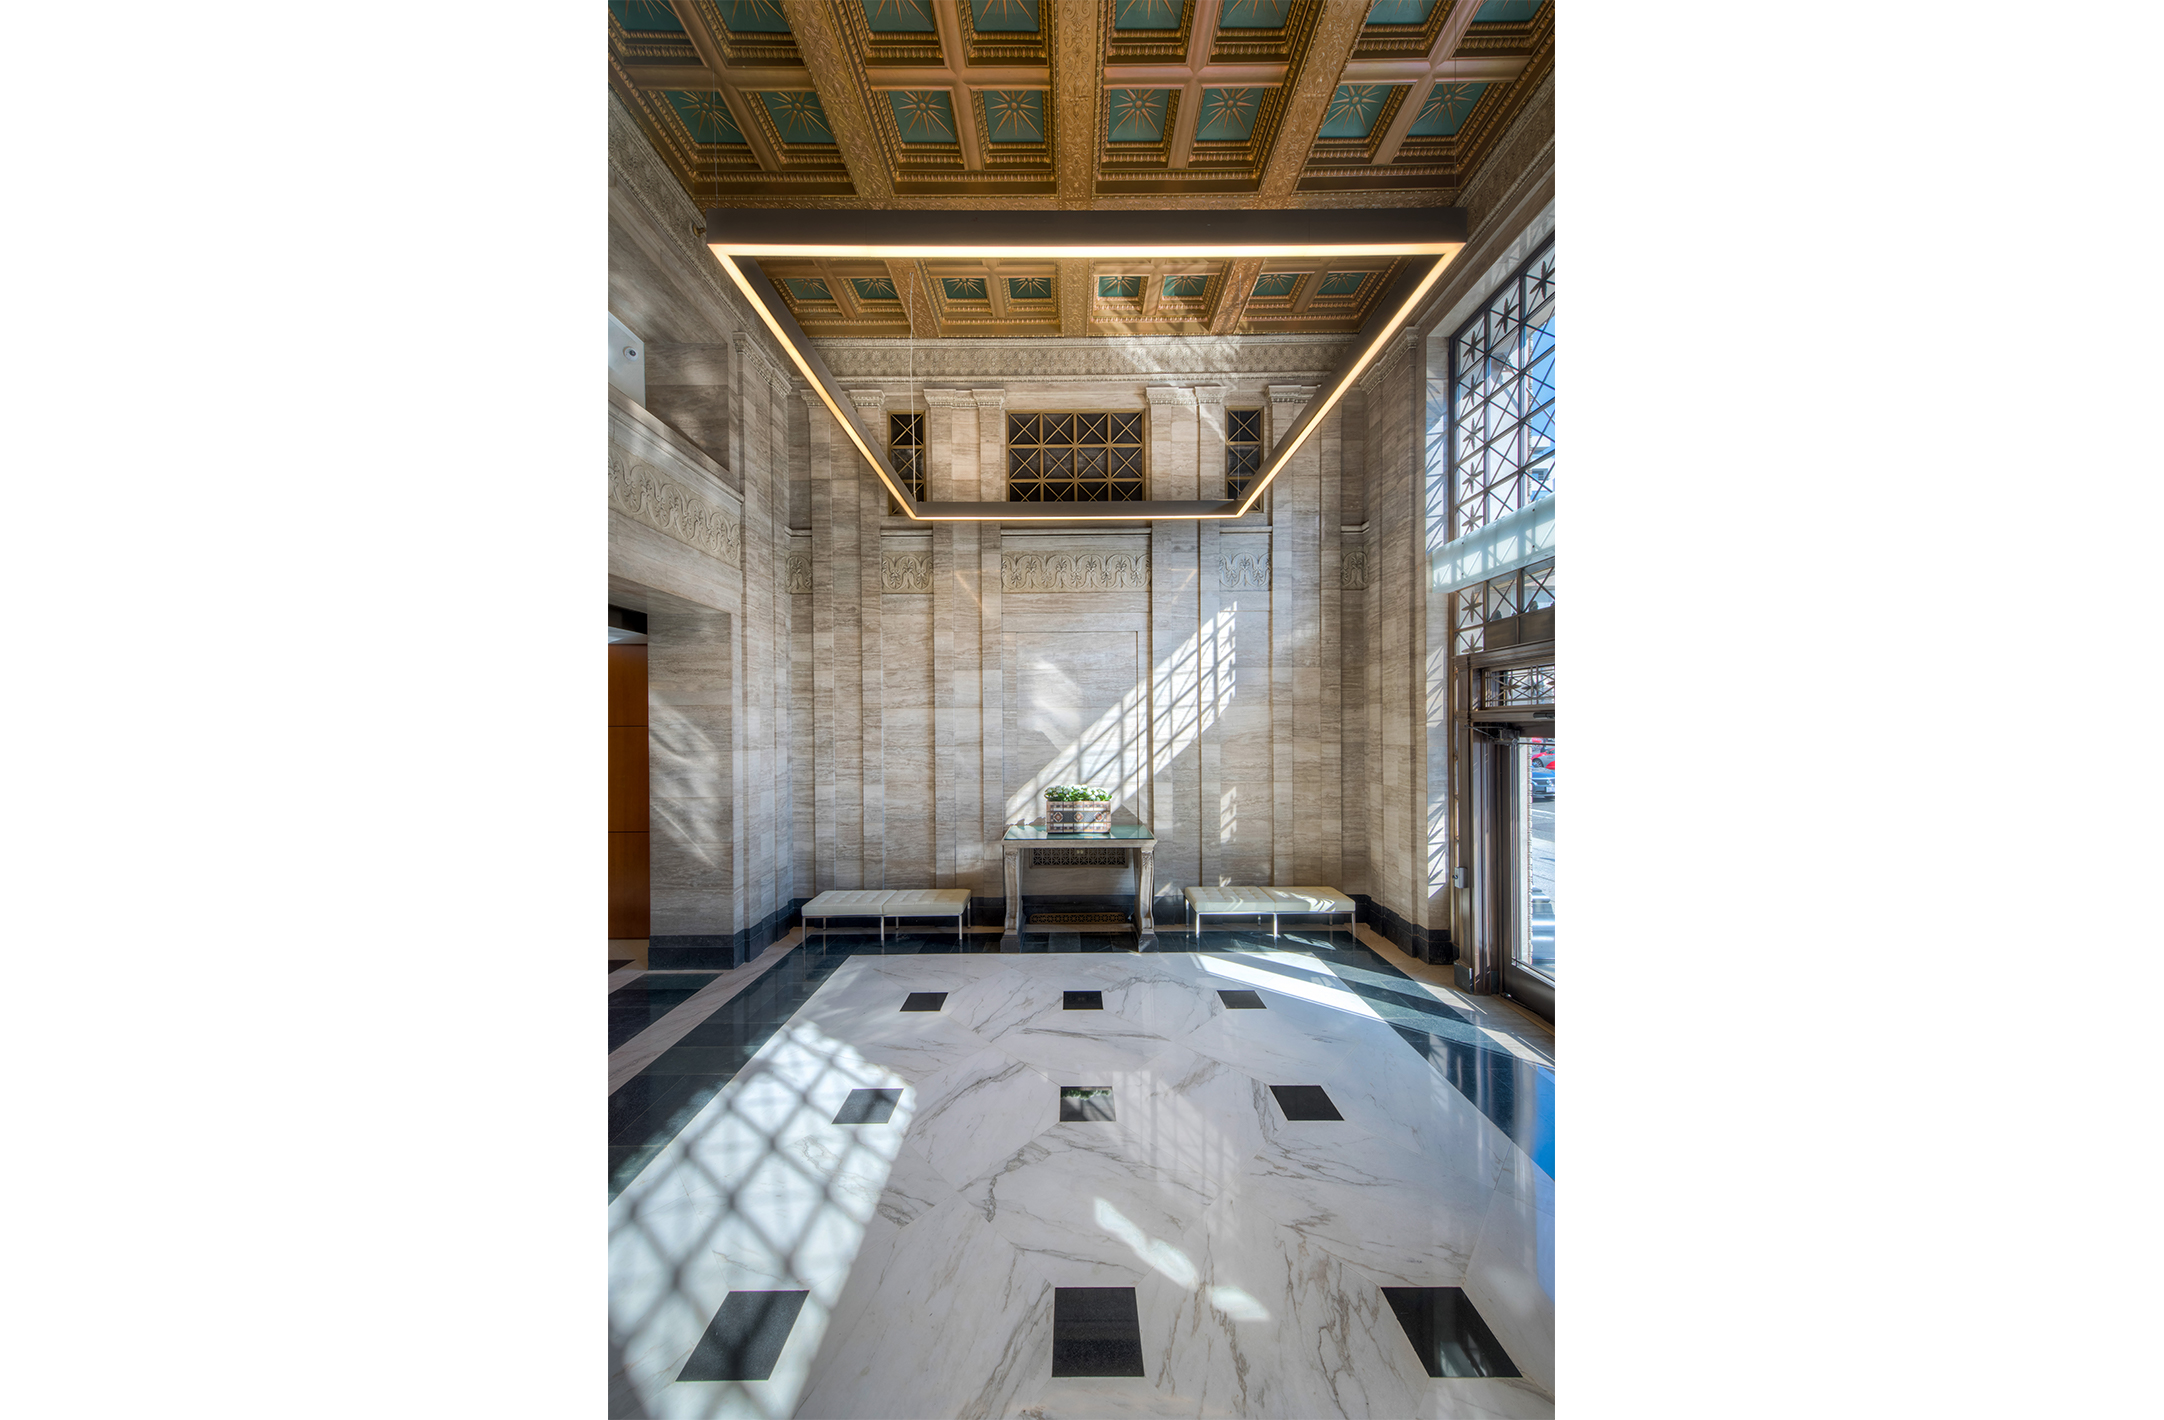 Image of the 1500 K Street office building lobby with a focus on coffered ceiling and LED lighting installations